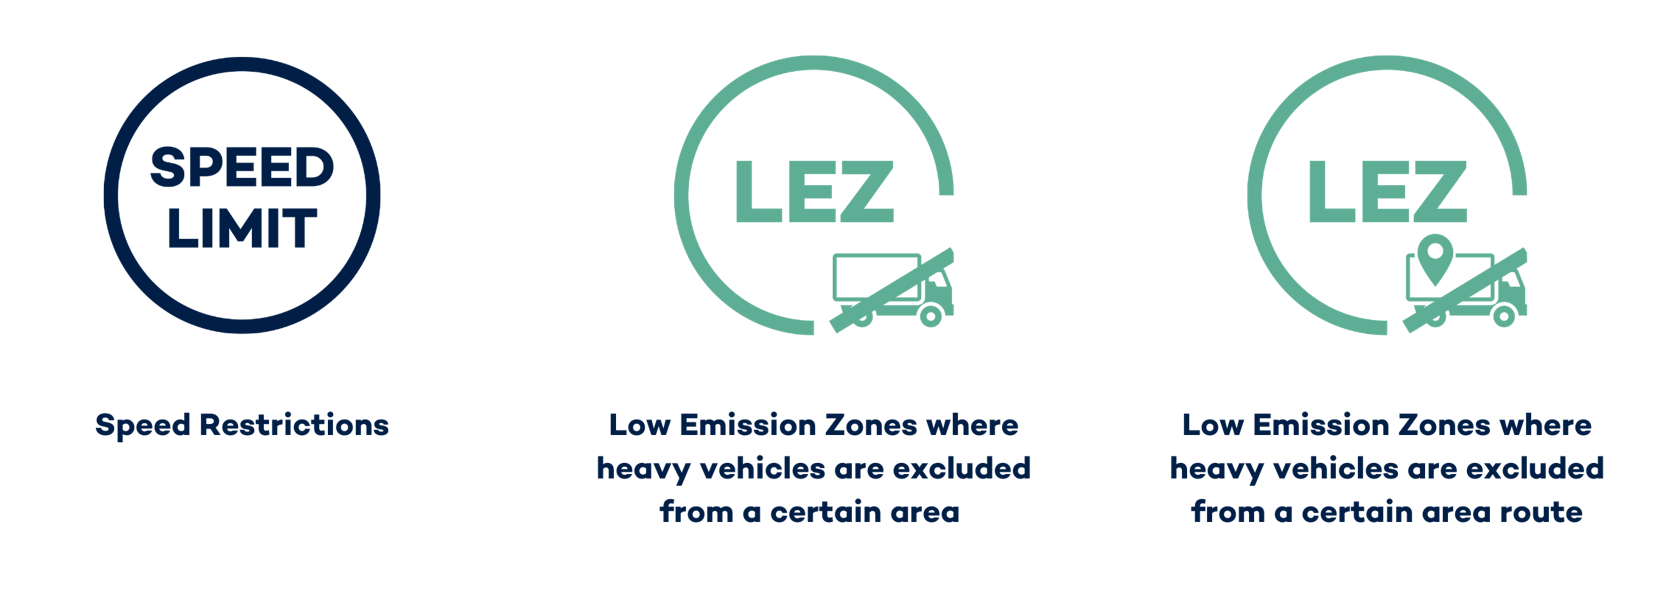 Emission Reduction Strategies: Speed Limits, Low Emission Zones in certain areas and on certain routes.